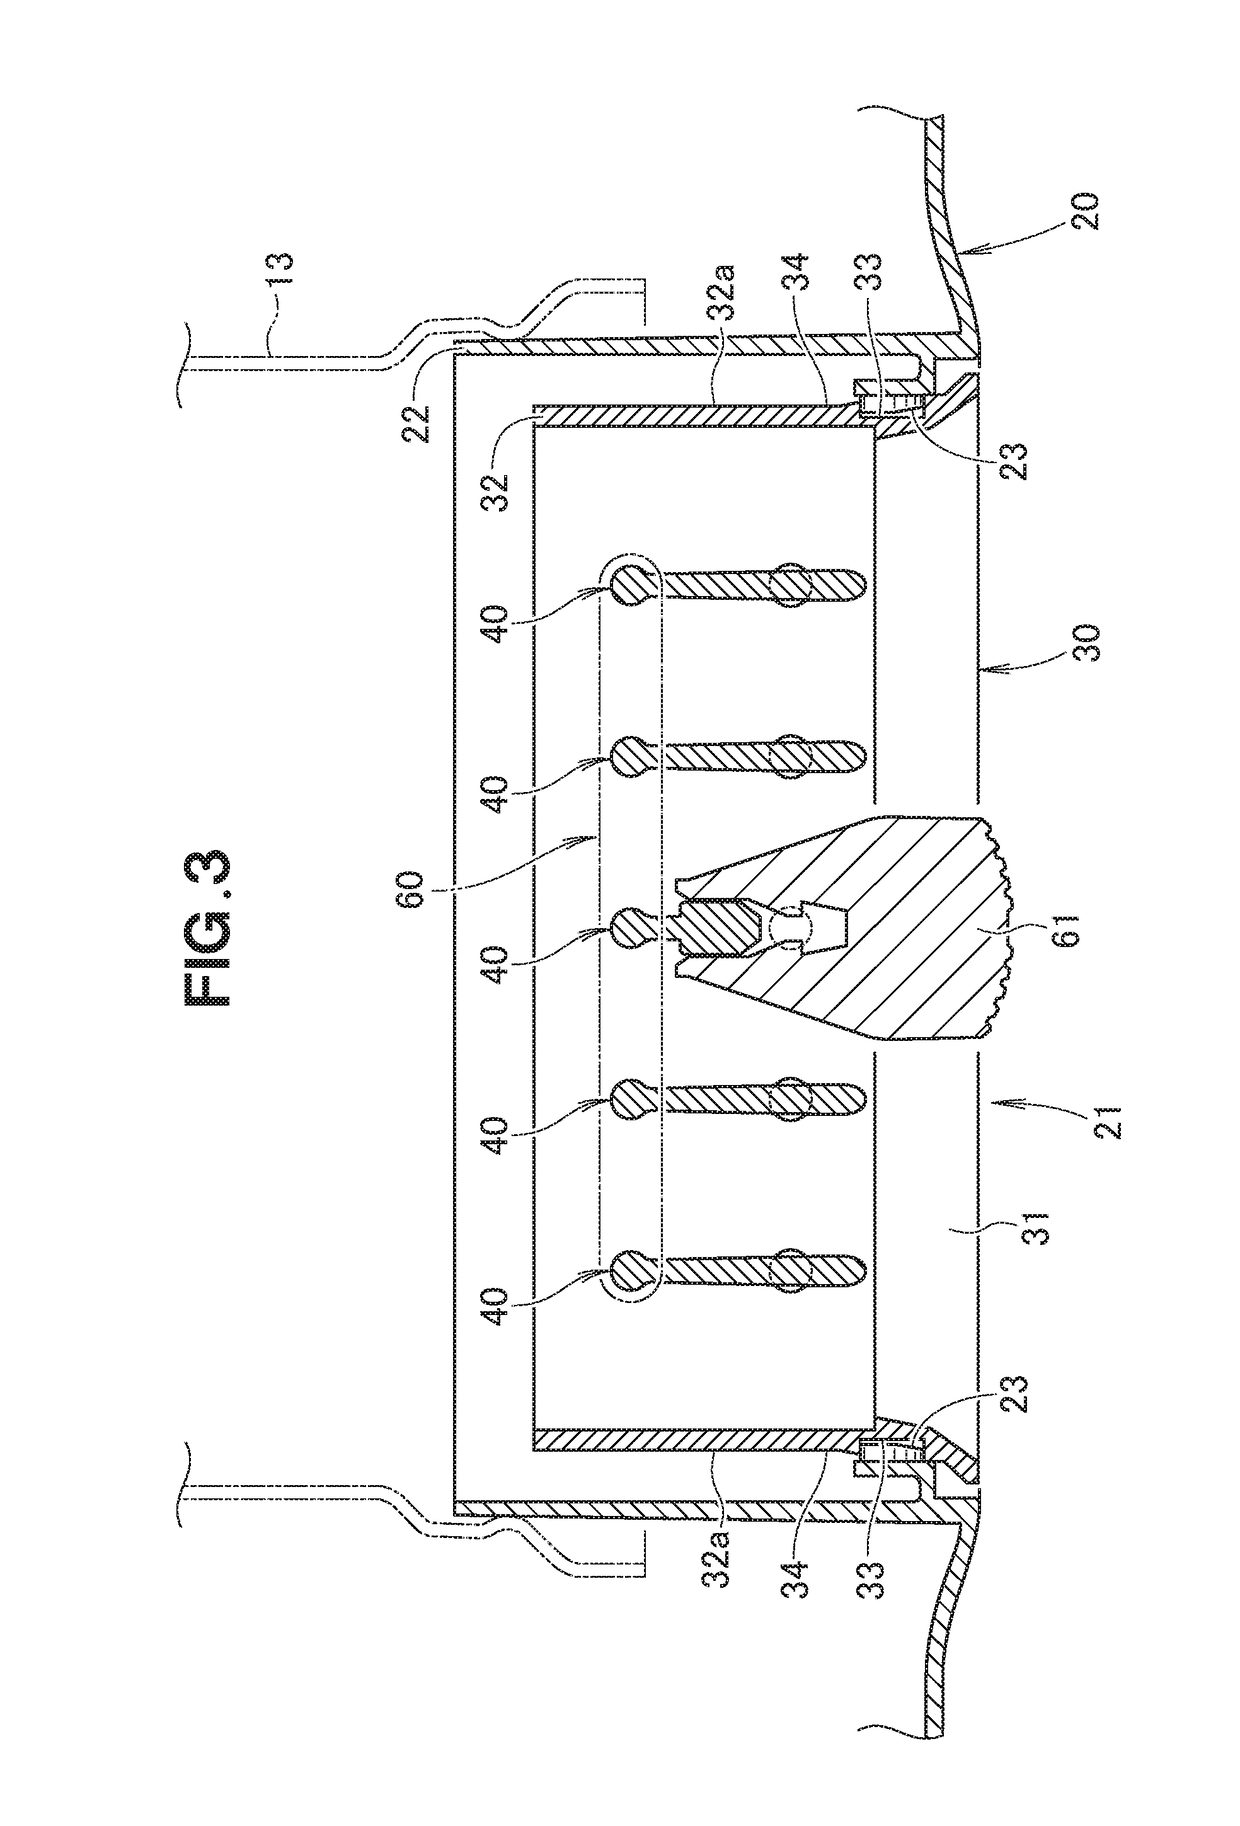 Air conditioning blower hole apparatus